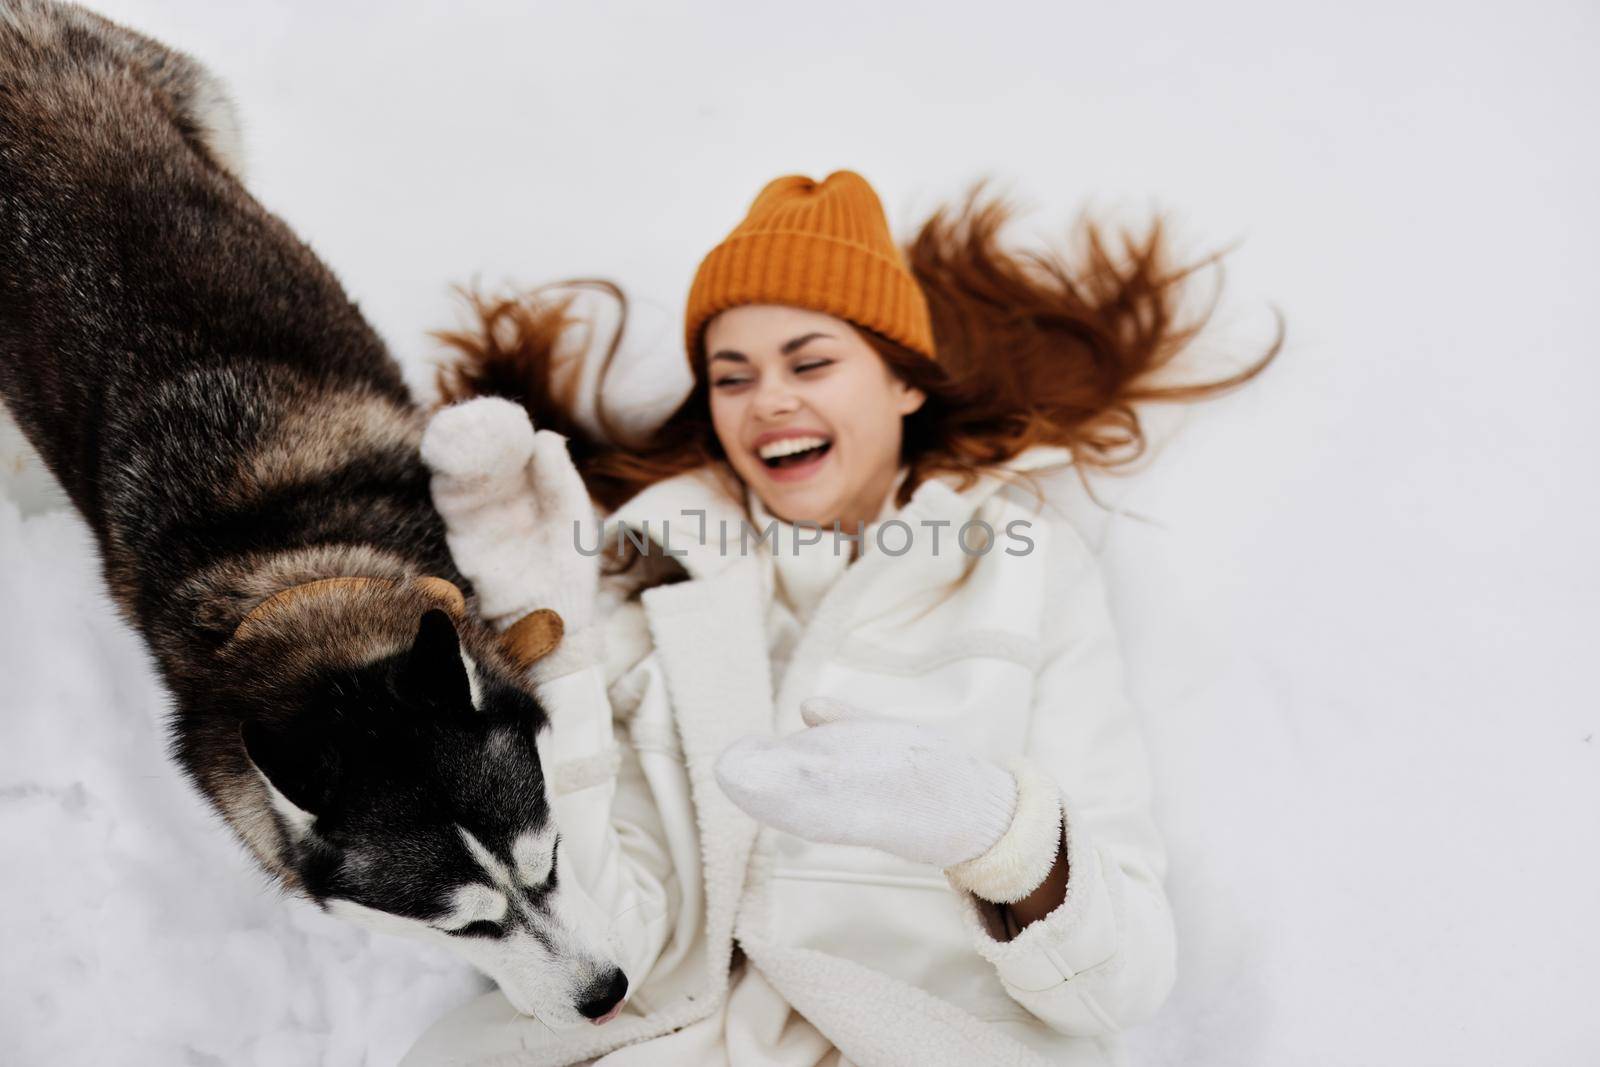 young woman in the snow playing with a dog fun friendship winter holidays. High quality photo